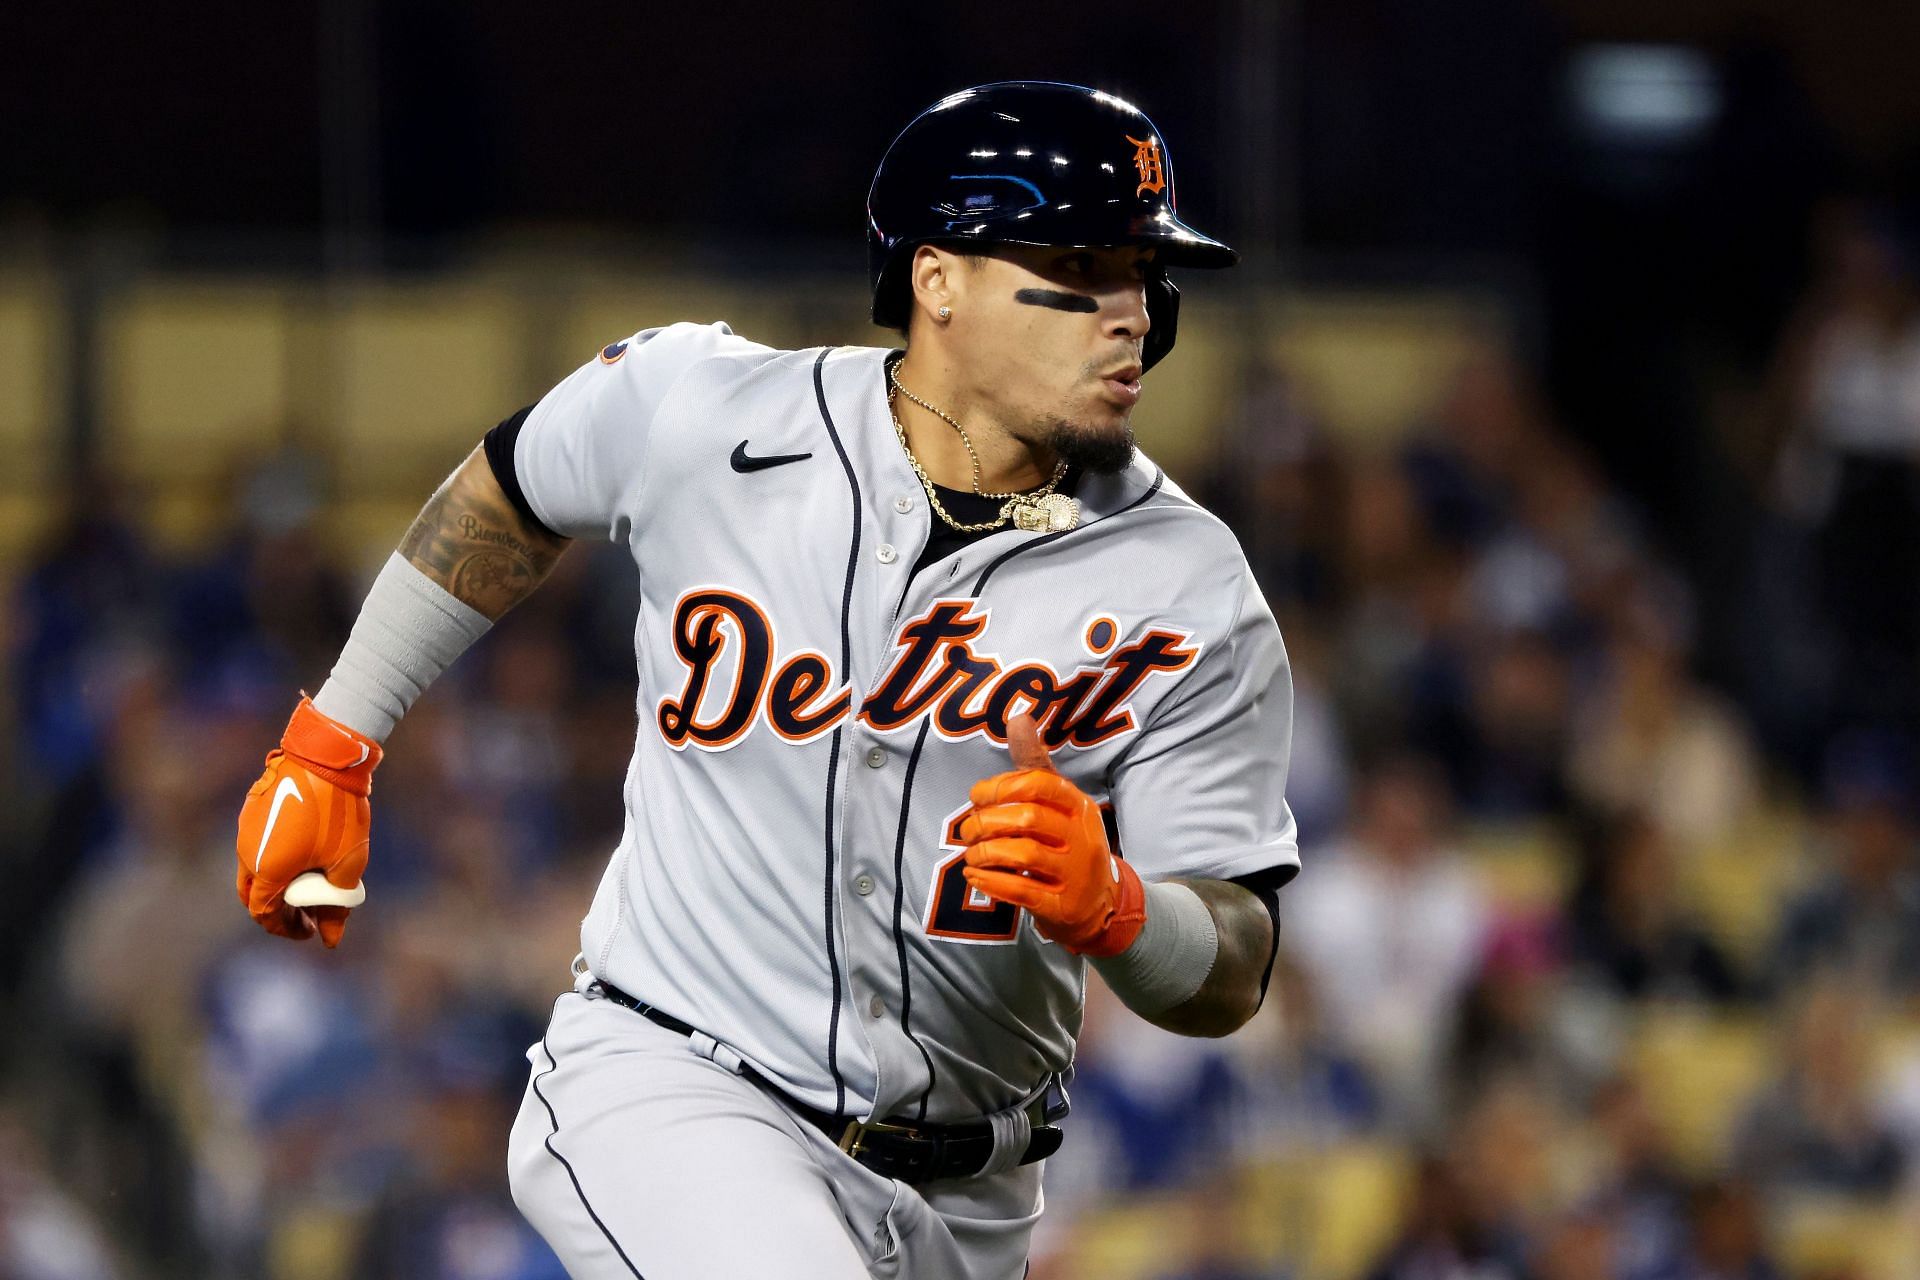 Tigers fans go nuts for Javy Baez's moonshot, first home run in